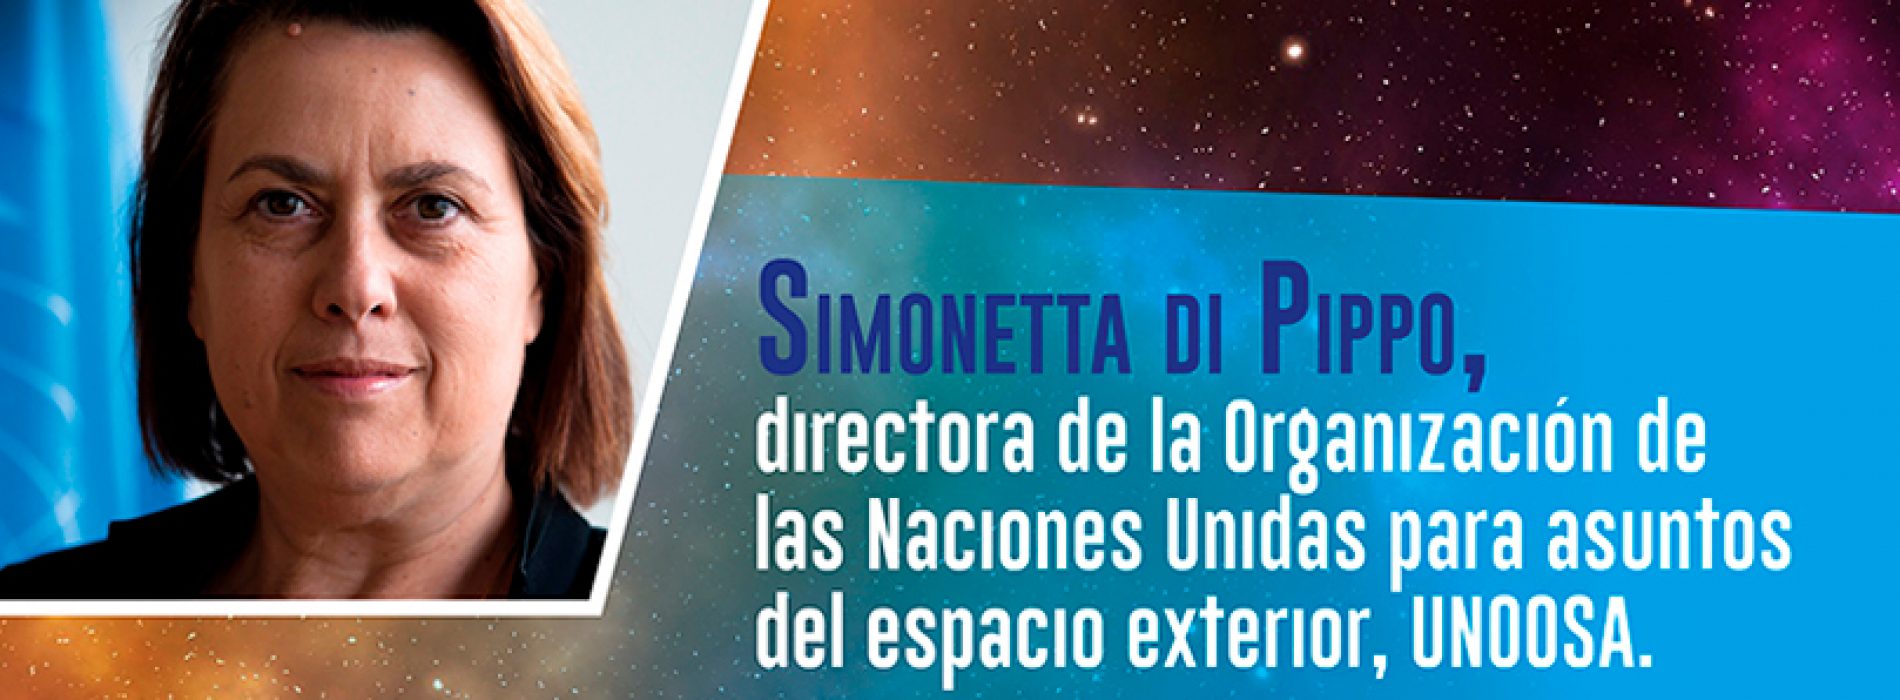 Charla magistral “Space 2030 – The role of the United Nations in bringing the benefits of space to humankind”